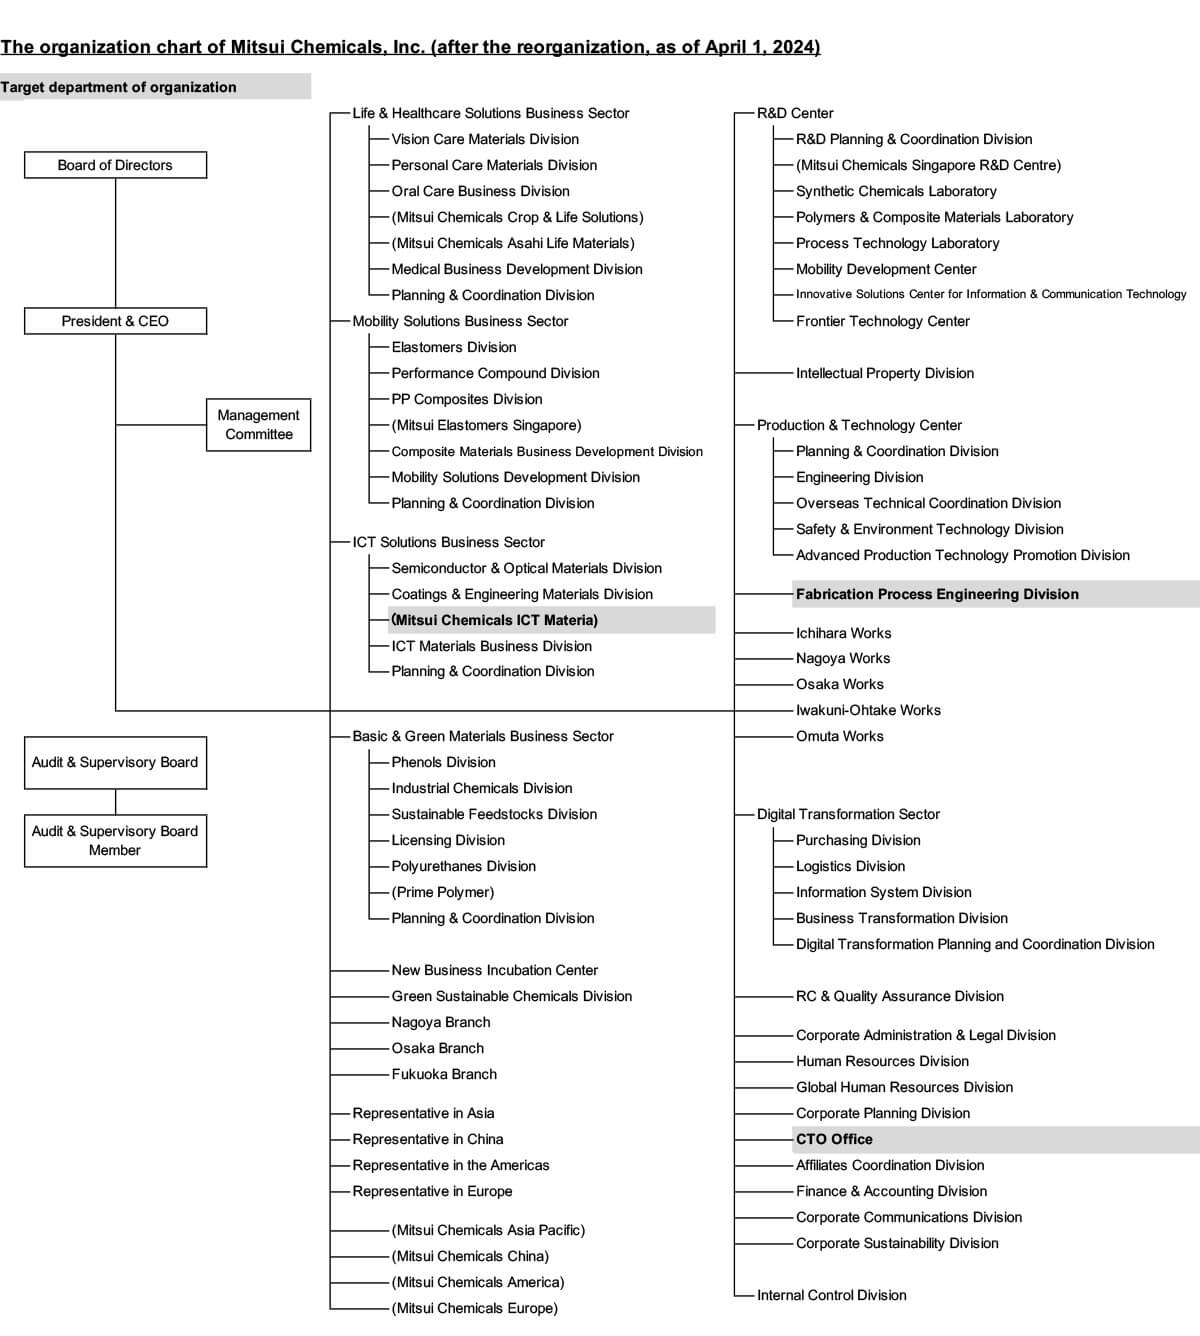 The organization chart of Mitsui Chemicals, Inc. (after the reorganization, as of April 1, 2024)